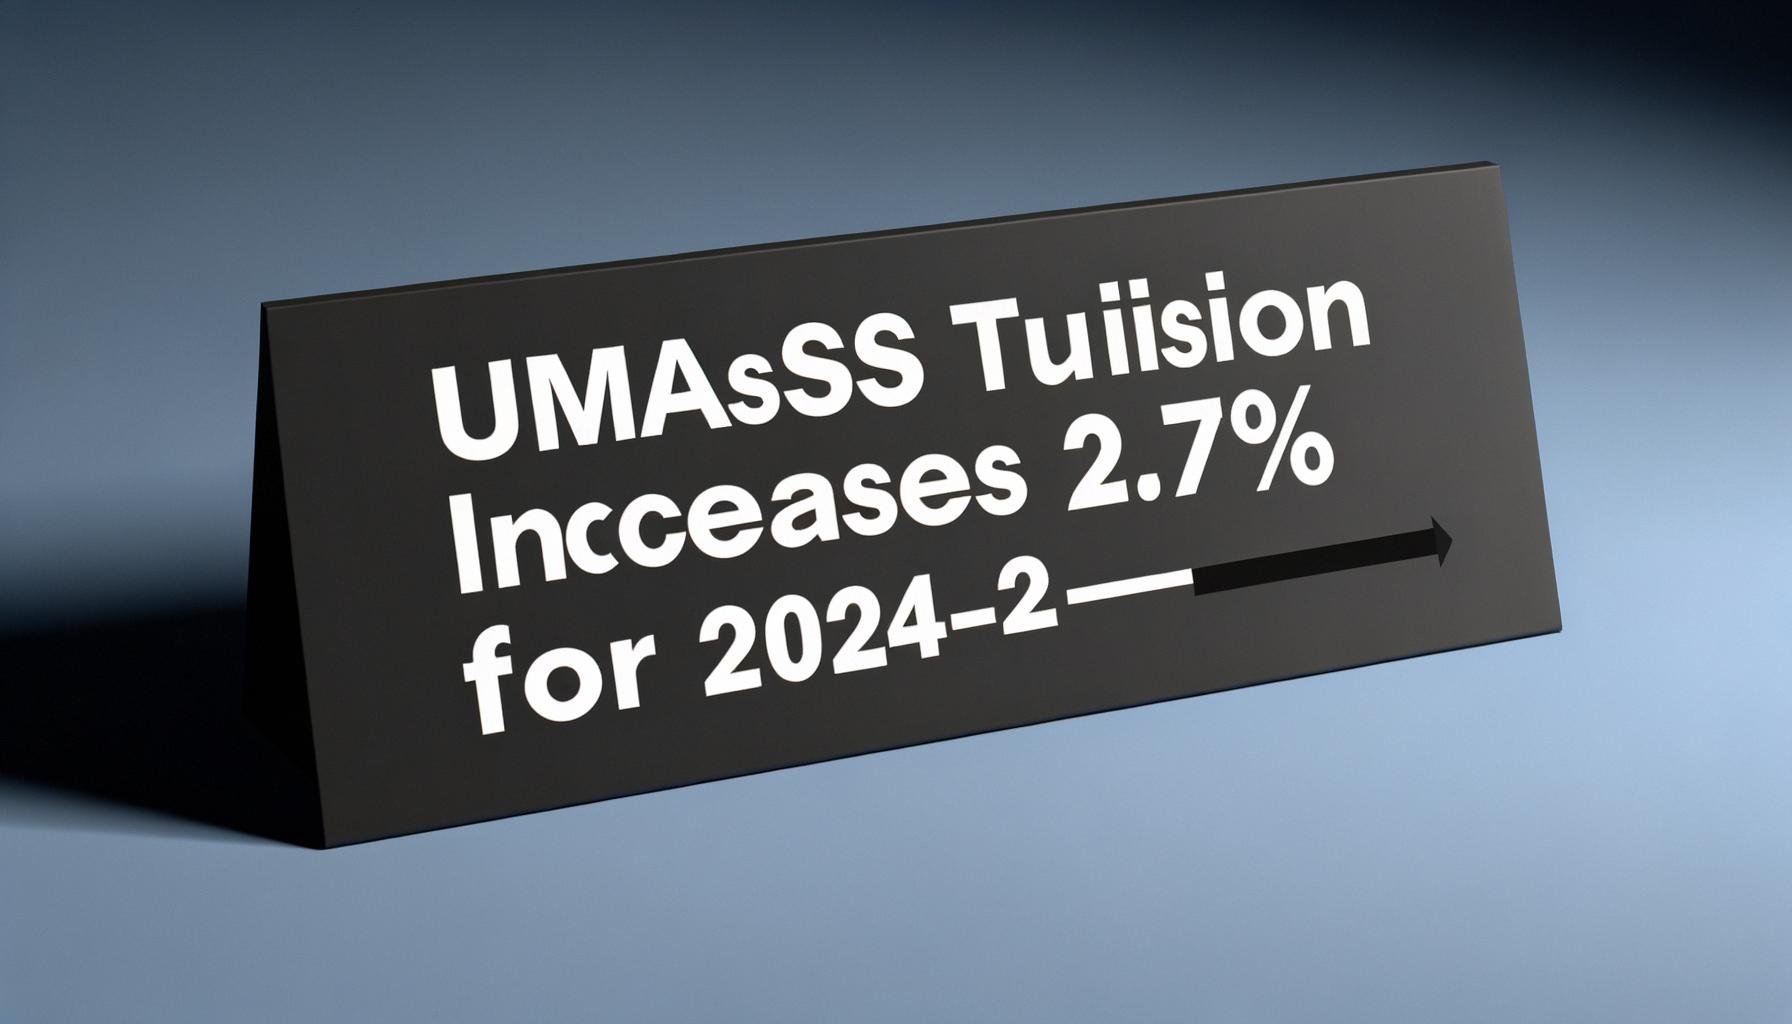 UMass tuition increases to cover rising operational costs.